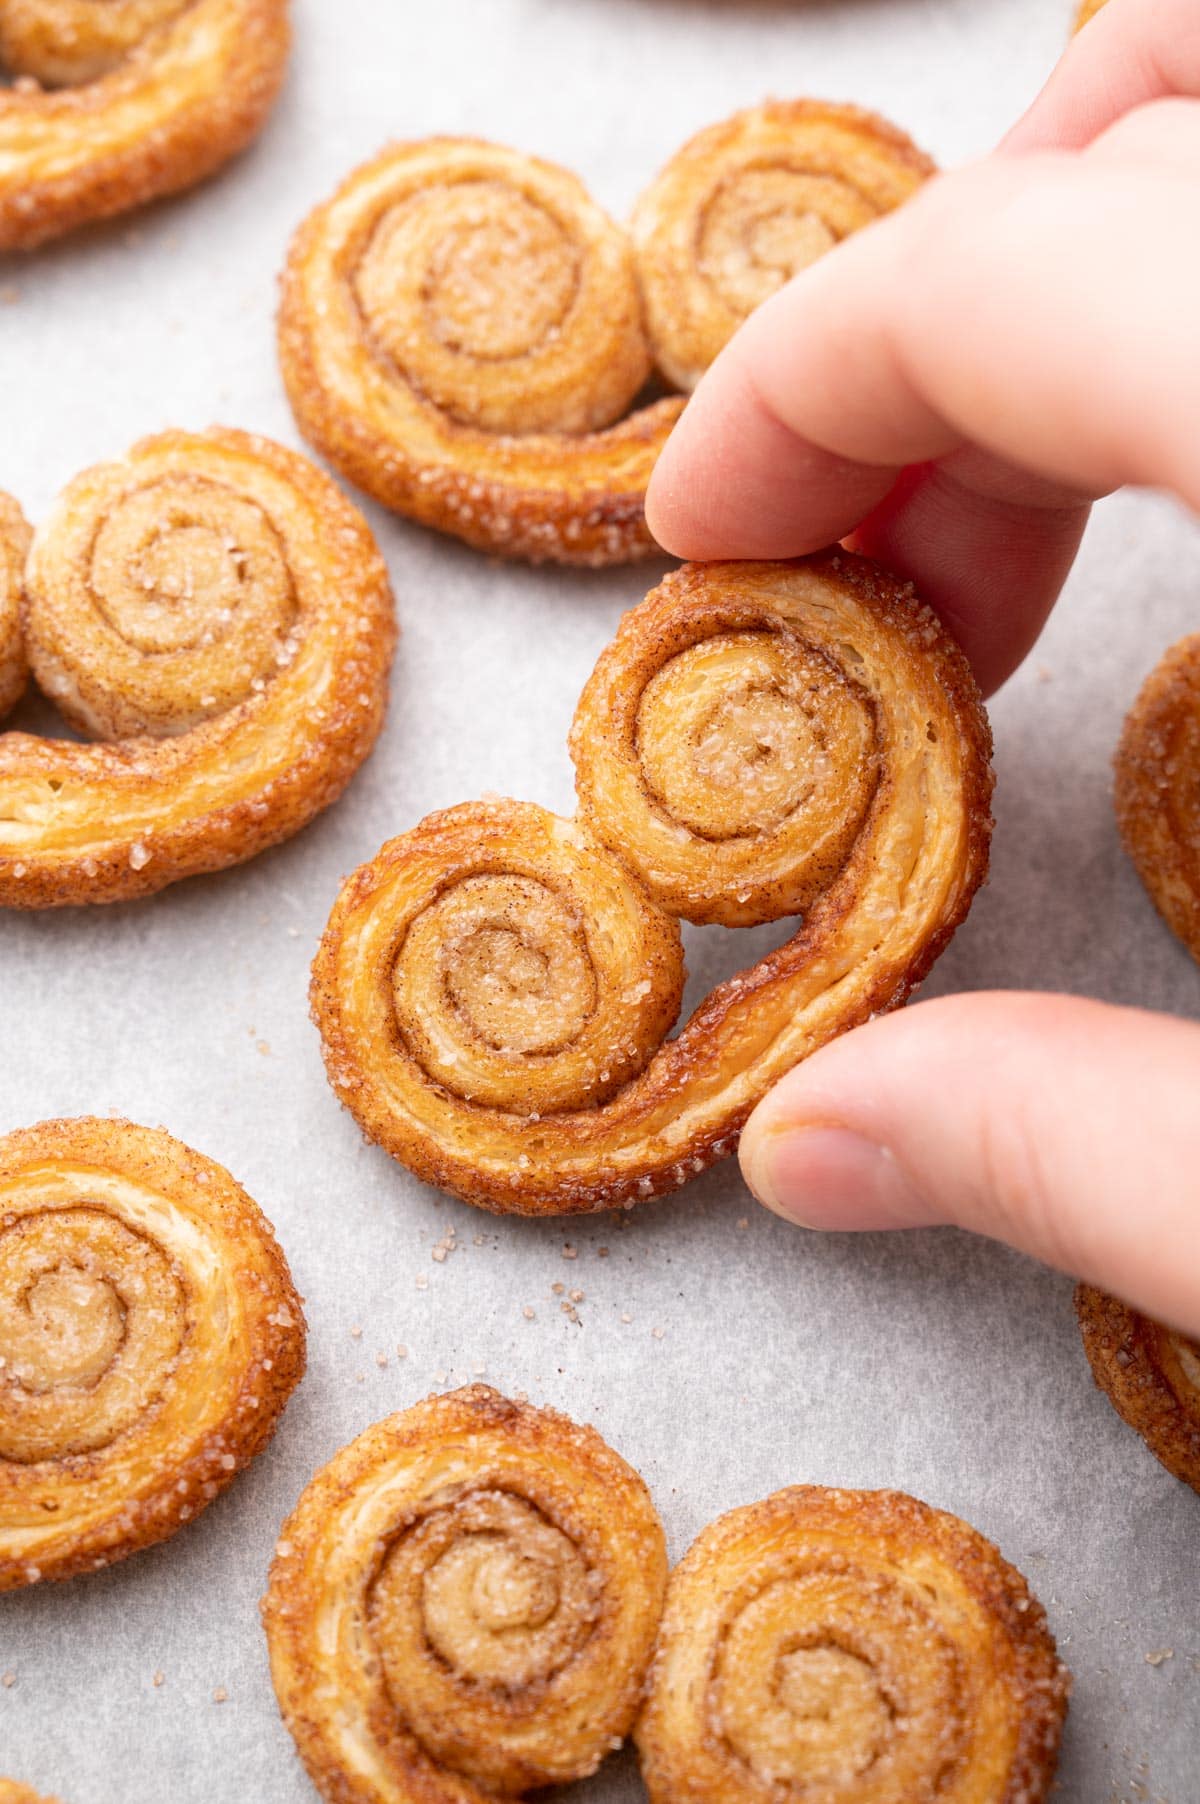 Palmier cookie is being held in a hand.